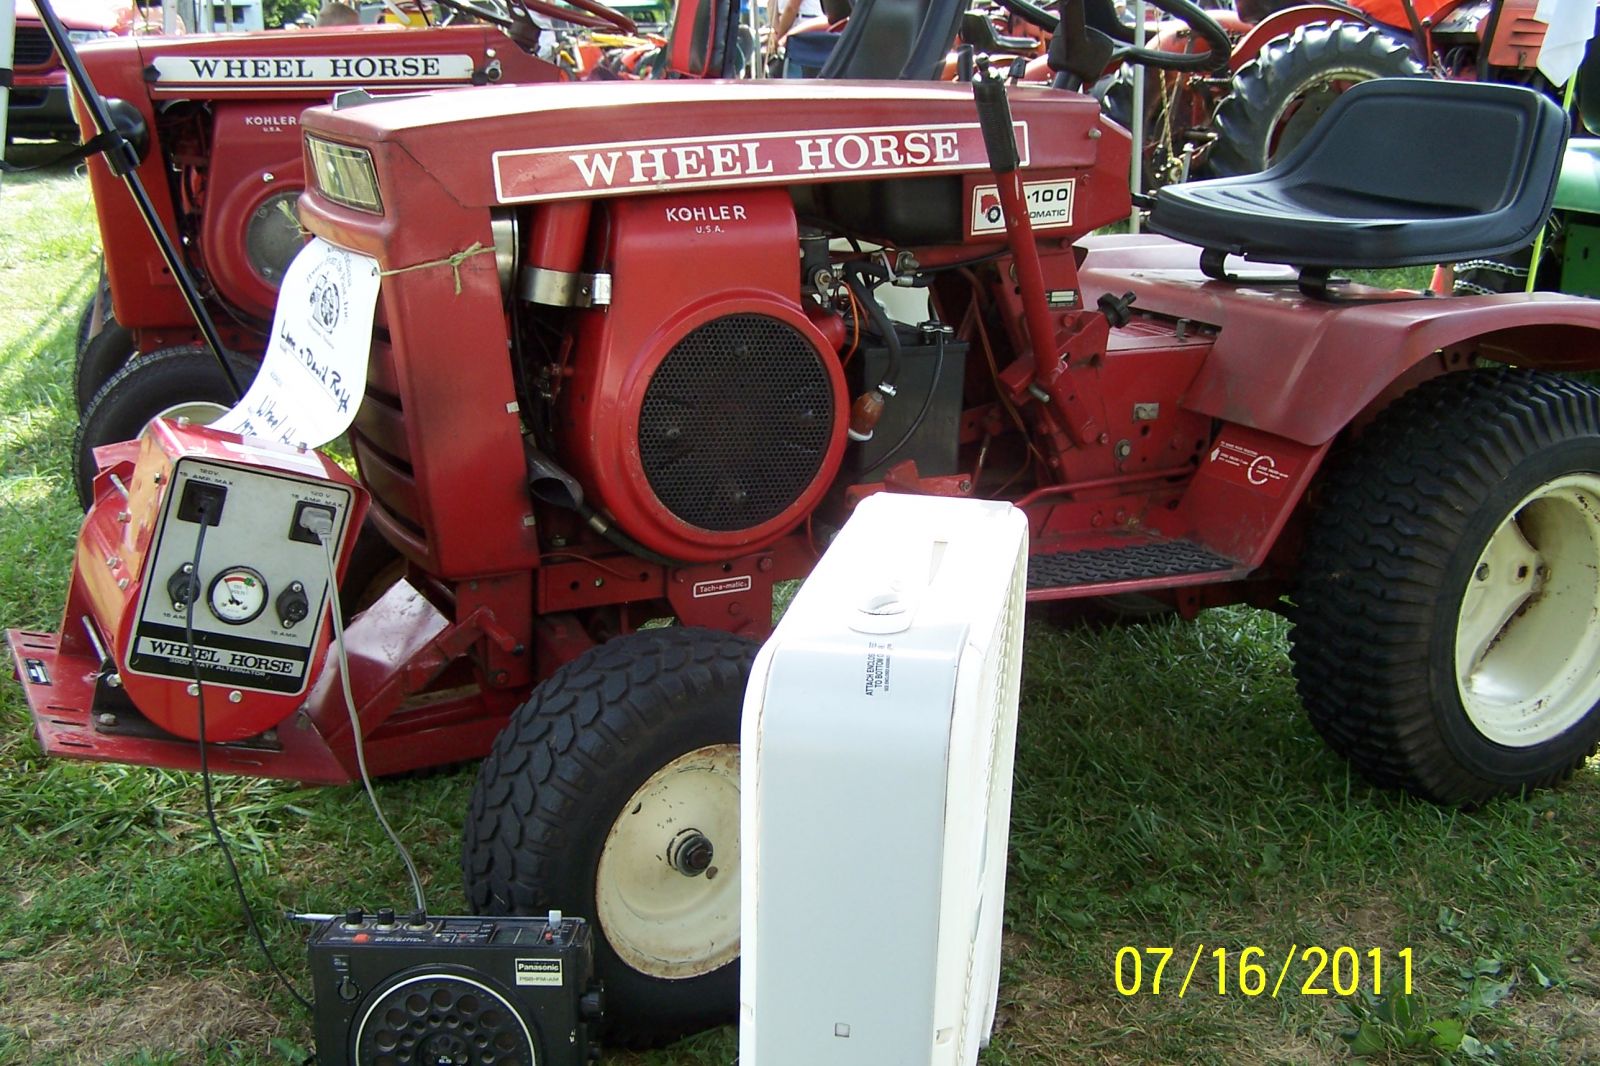 Wheel Horse Picture Gallery 1973 - 1977 1975 B-100 and Wheel Horse ...